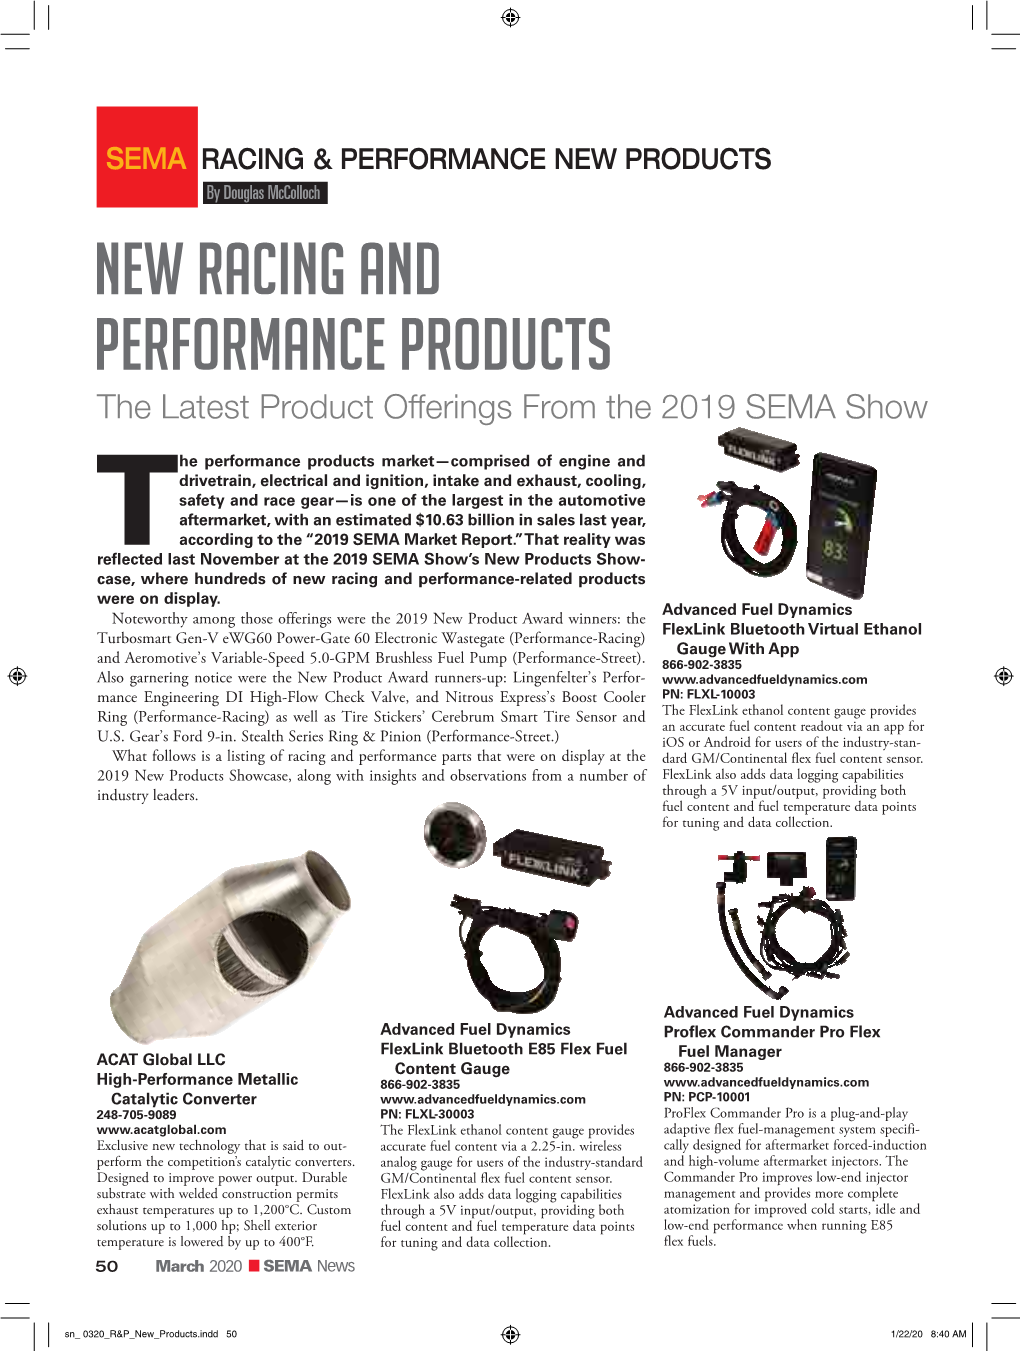 NEW RACING and PERFORMANCE PRODUCTS the Latest Product Offerings from the 2019 SEMA Show